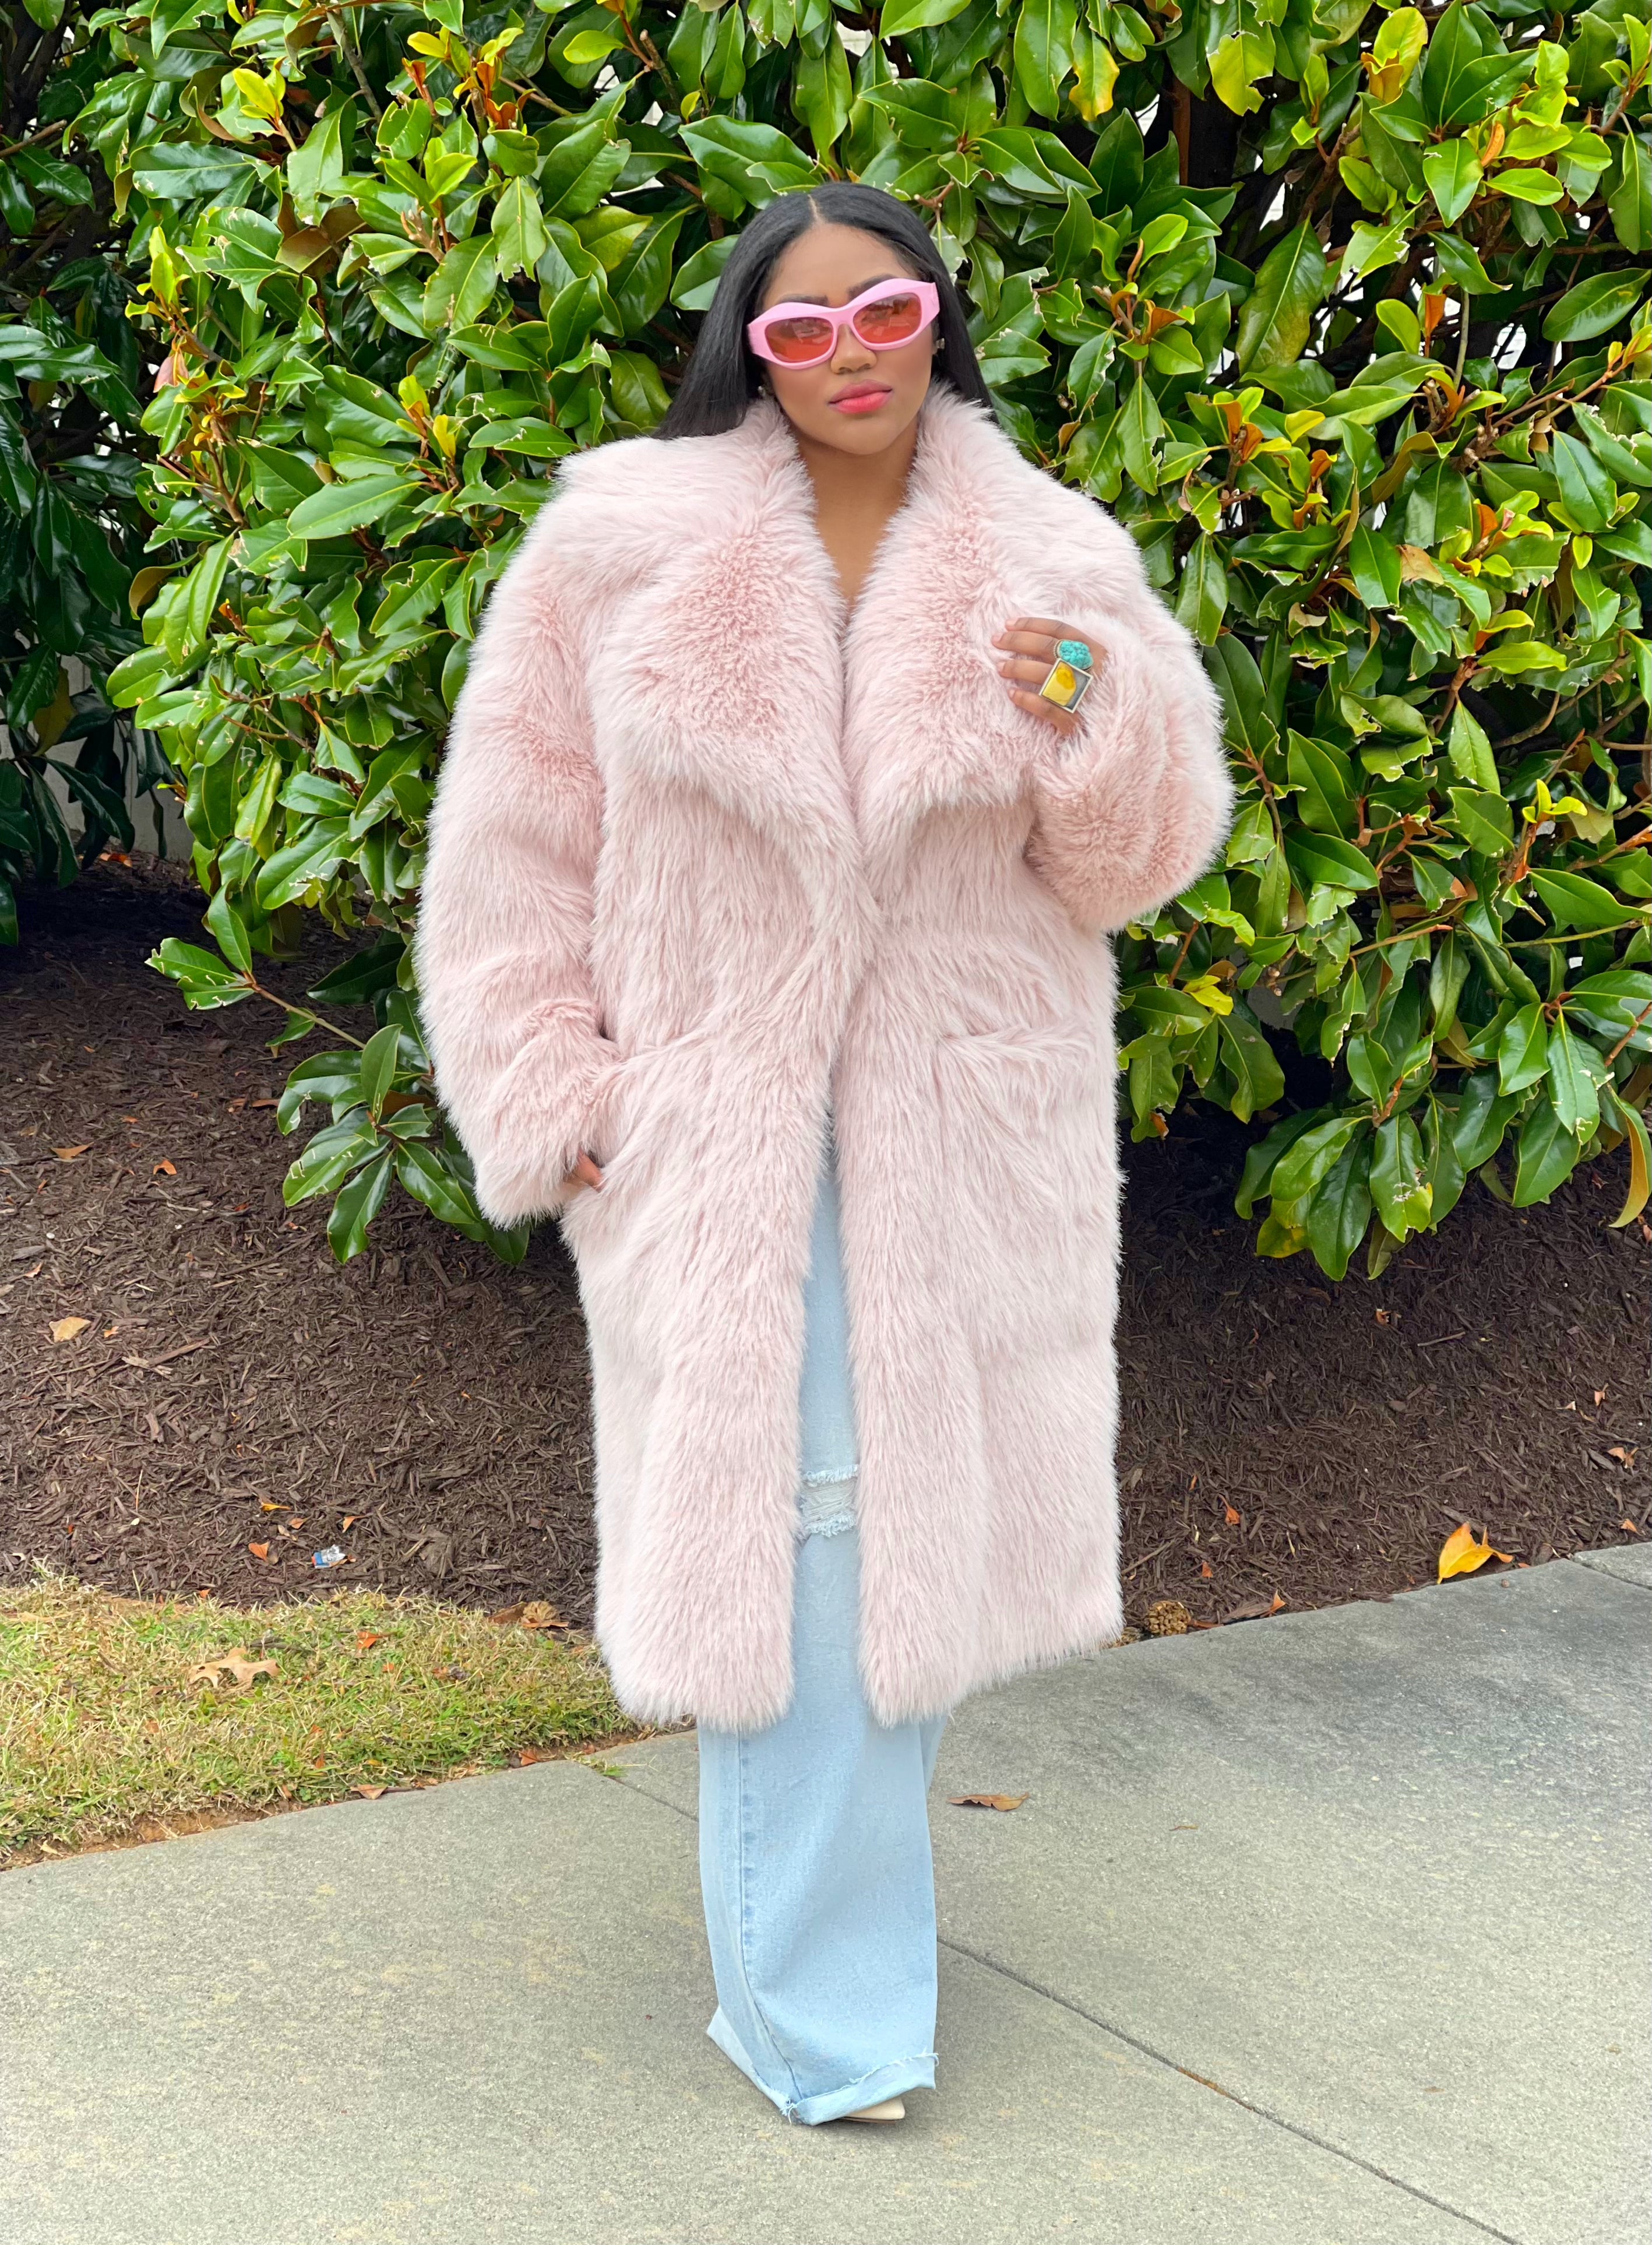 GOLDxTEAL pink fluffy faux fur coat. Stunning vegan fur coat with wide lapels and oversized pockets.